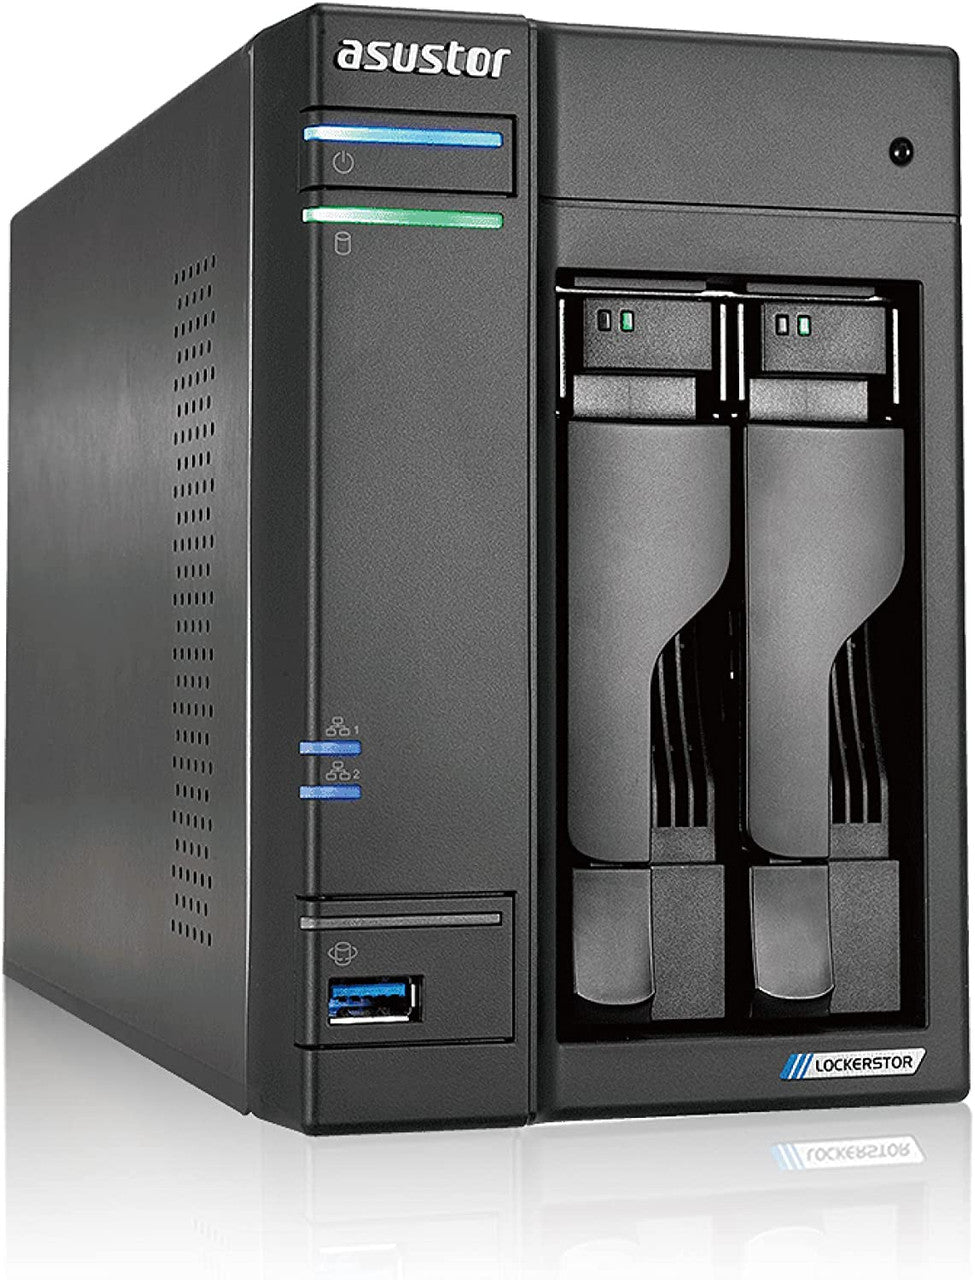 Asustor AS6602T 2-Bay Lockerstor 2 NAS with 8GB RAM and 24TB (2x12TB) Seagate Ironwolf NAS Drives